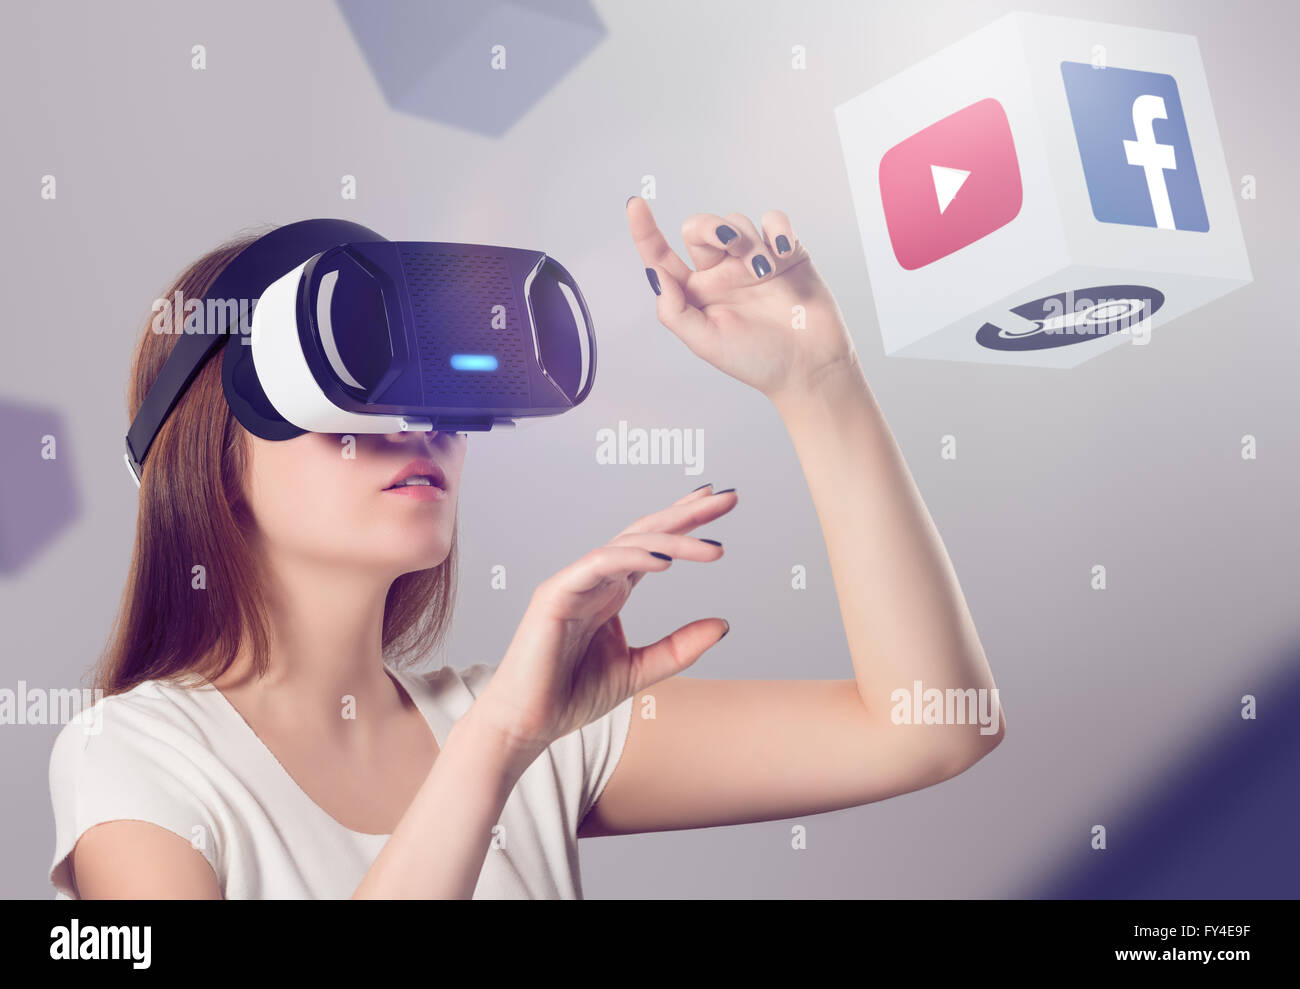 Varna, Bulgaria - March 10, 2016: Woman in VR headset looking up and interacting with Facebook Youtube Steam VR content. Stock Photo